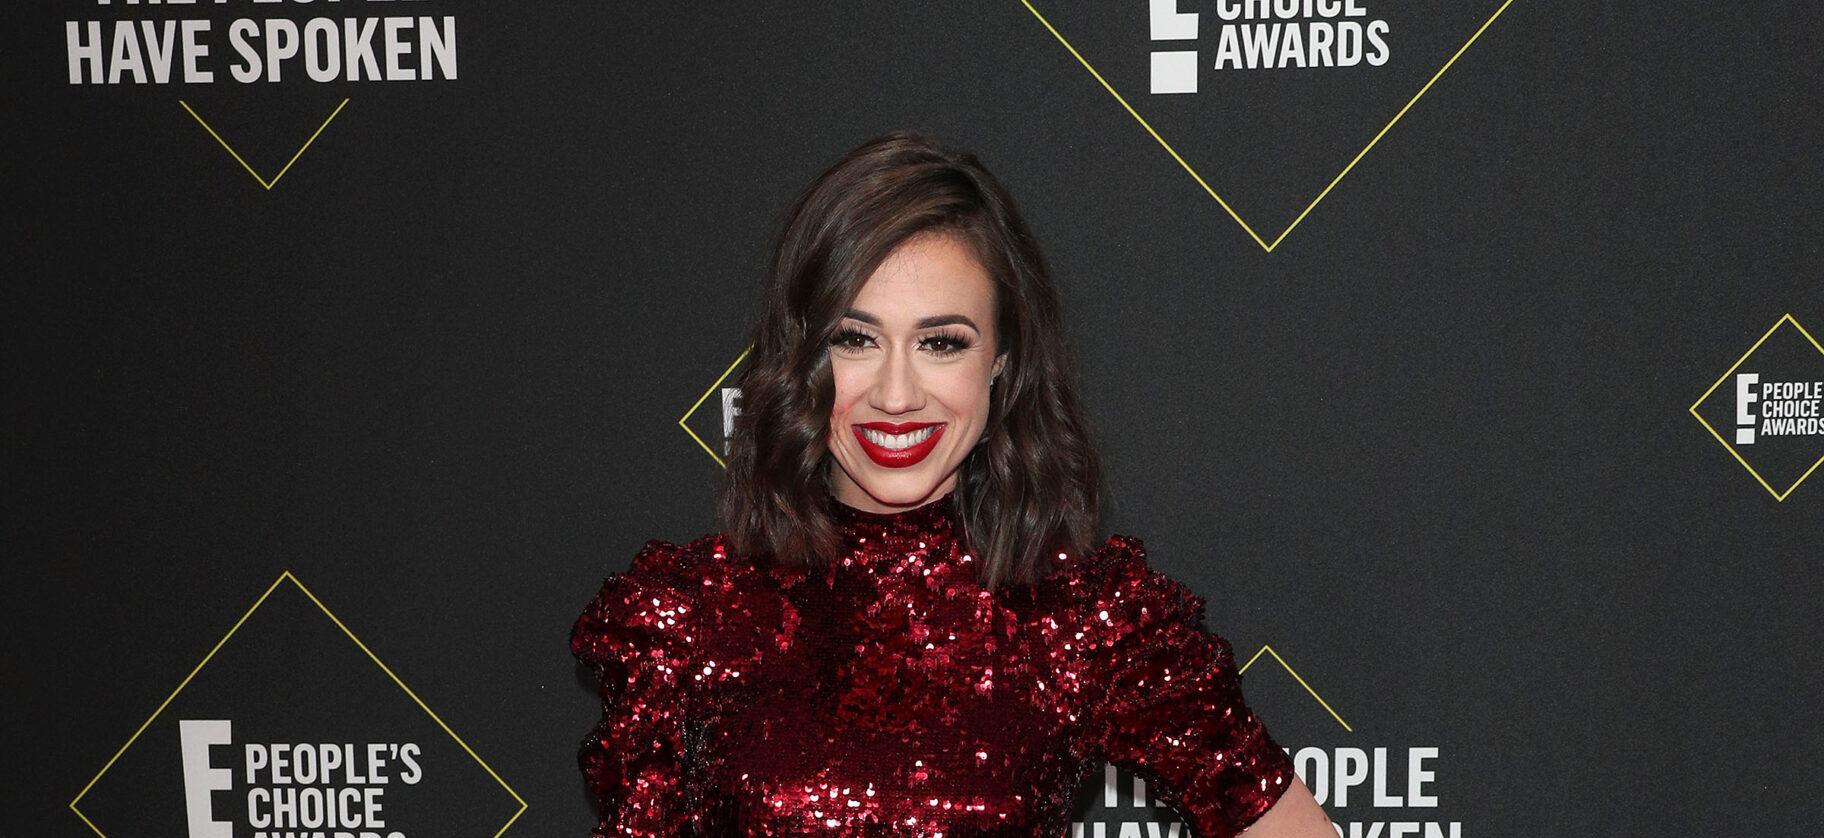 Colleen Ballinger’s Fans & Critics Debate Ongoing Content Controversy